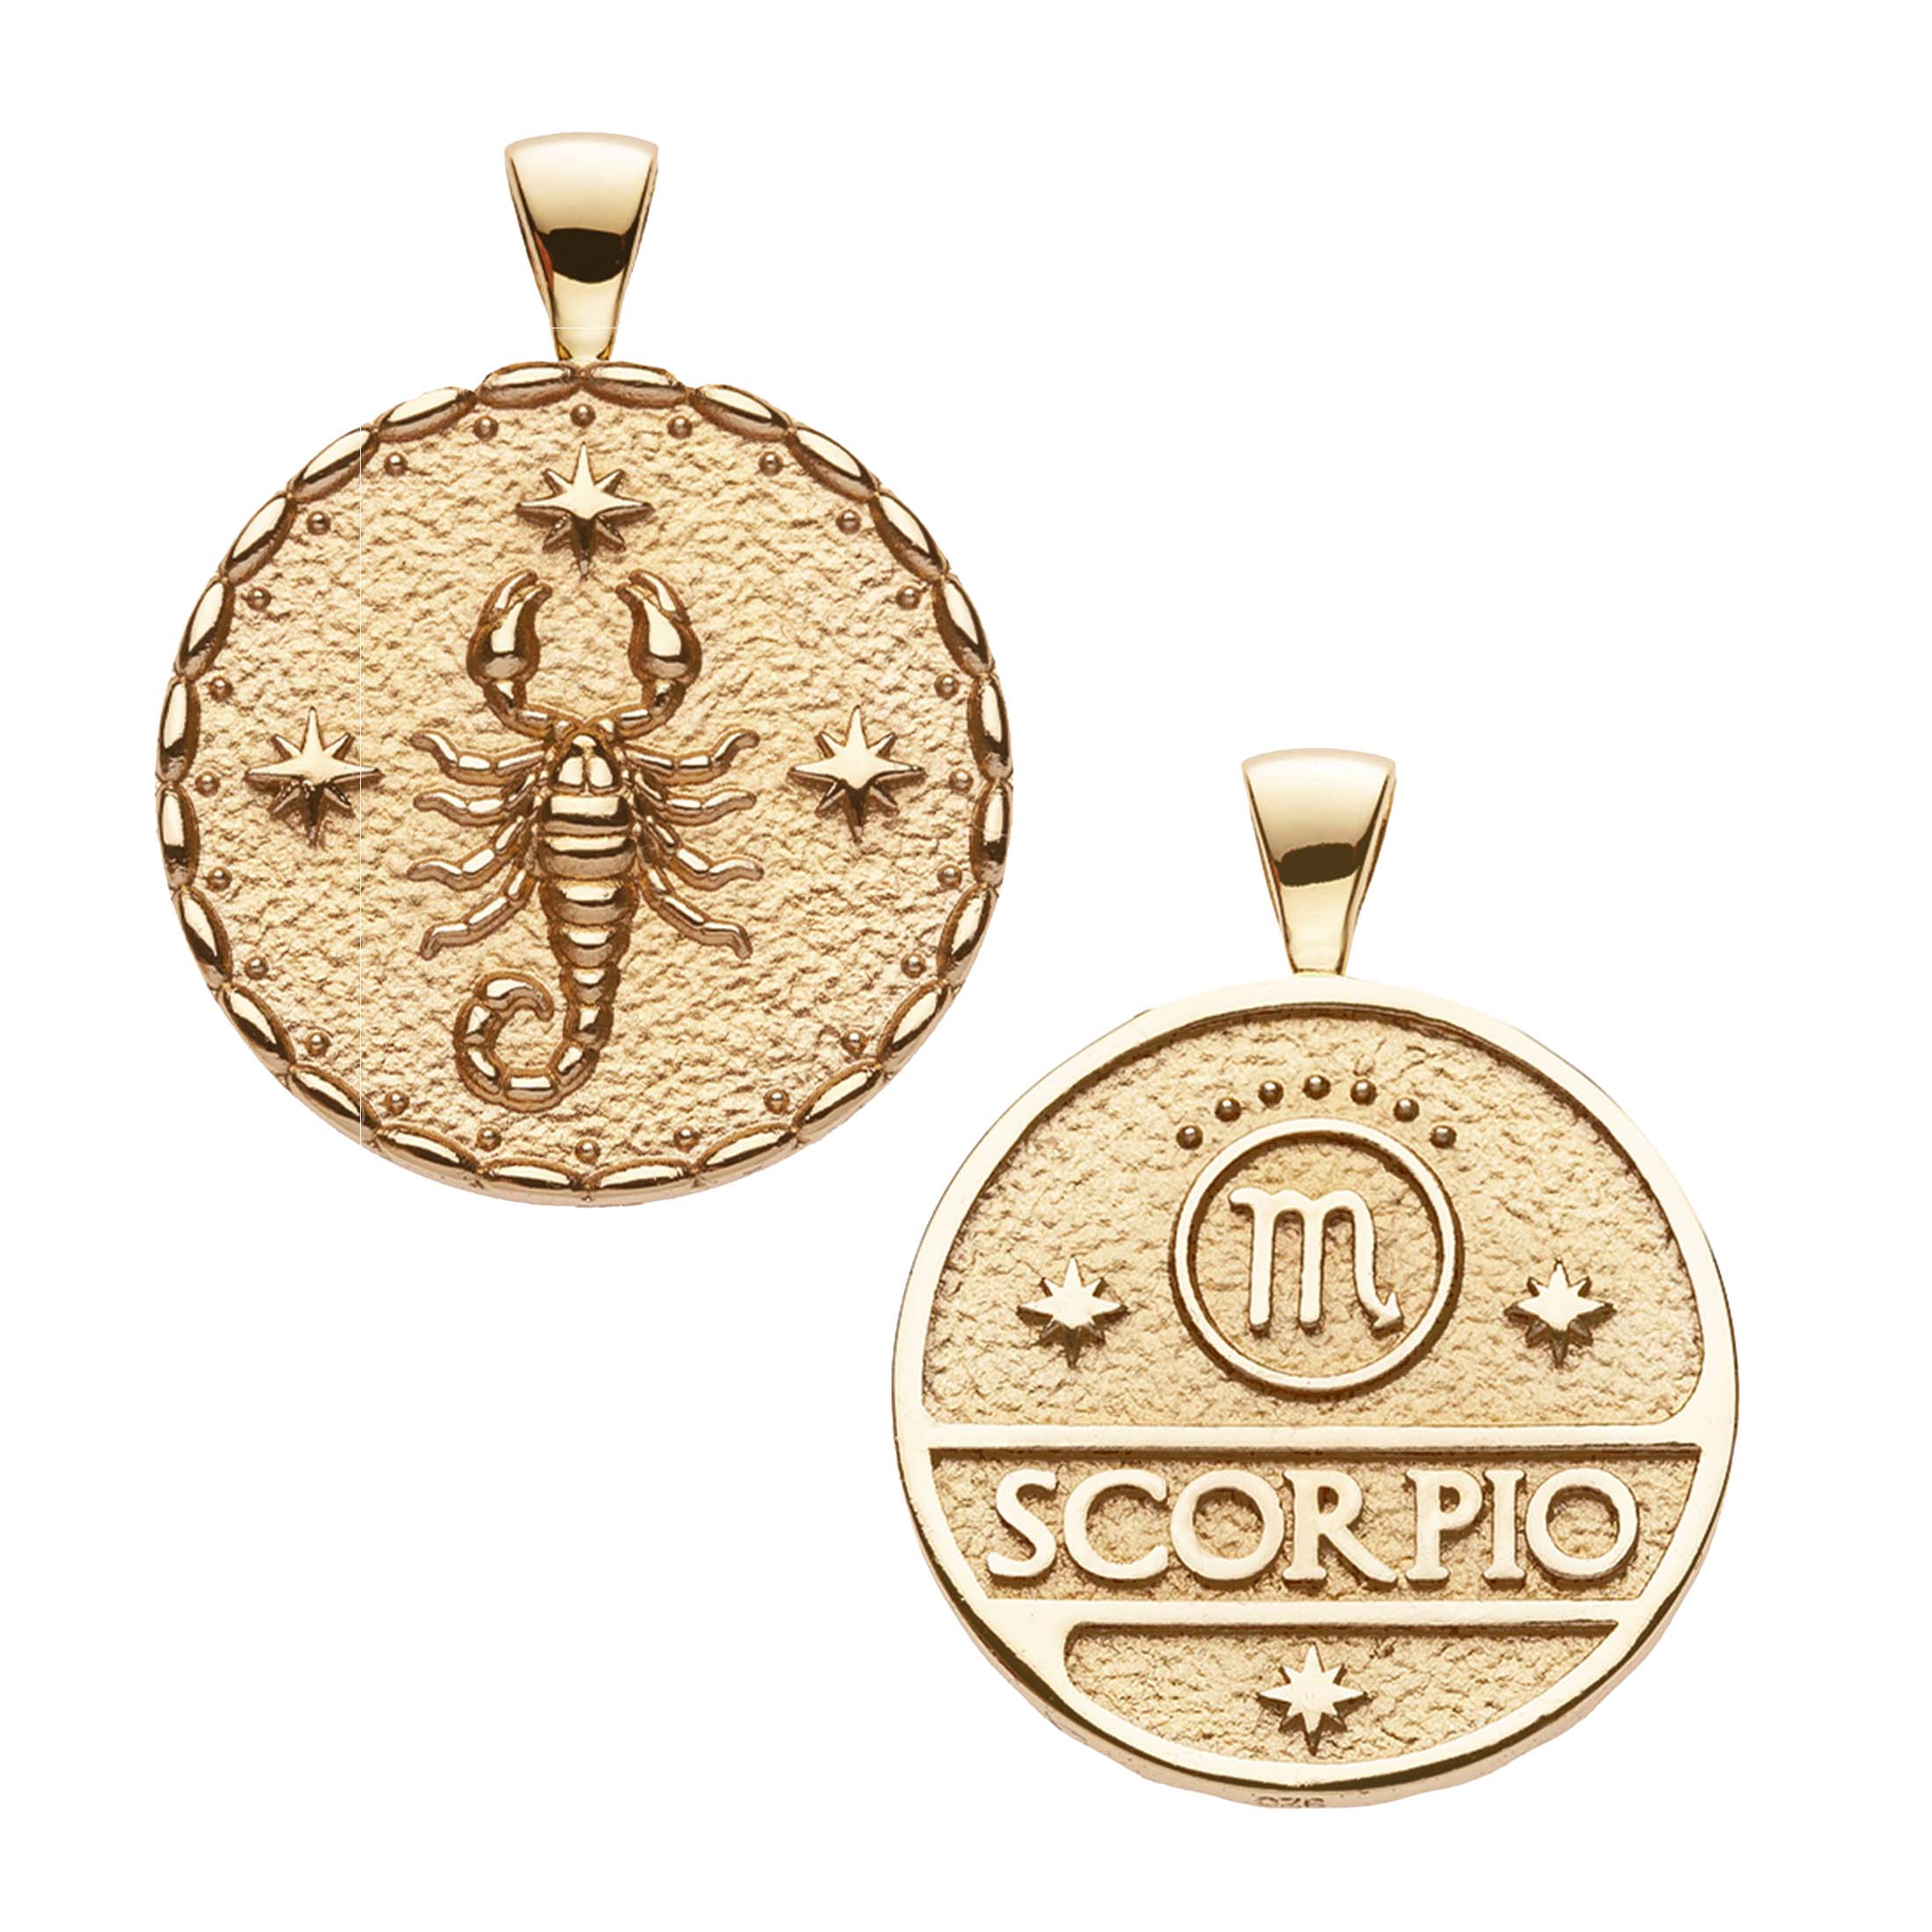 Zodiac Gold Pendant Coin Necklace with Astrology Symbol and